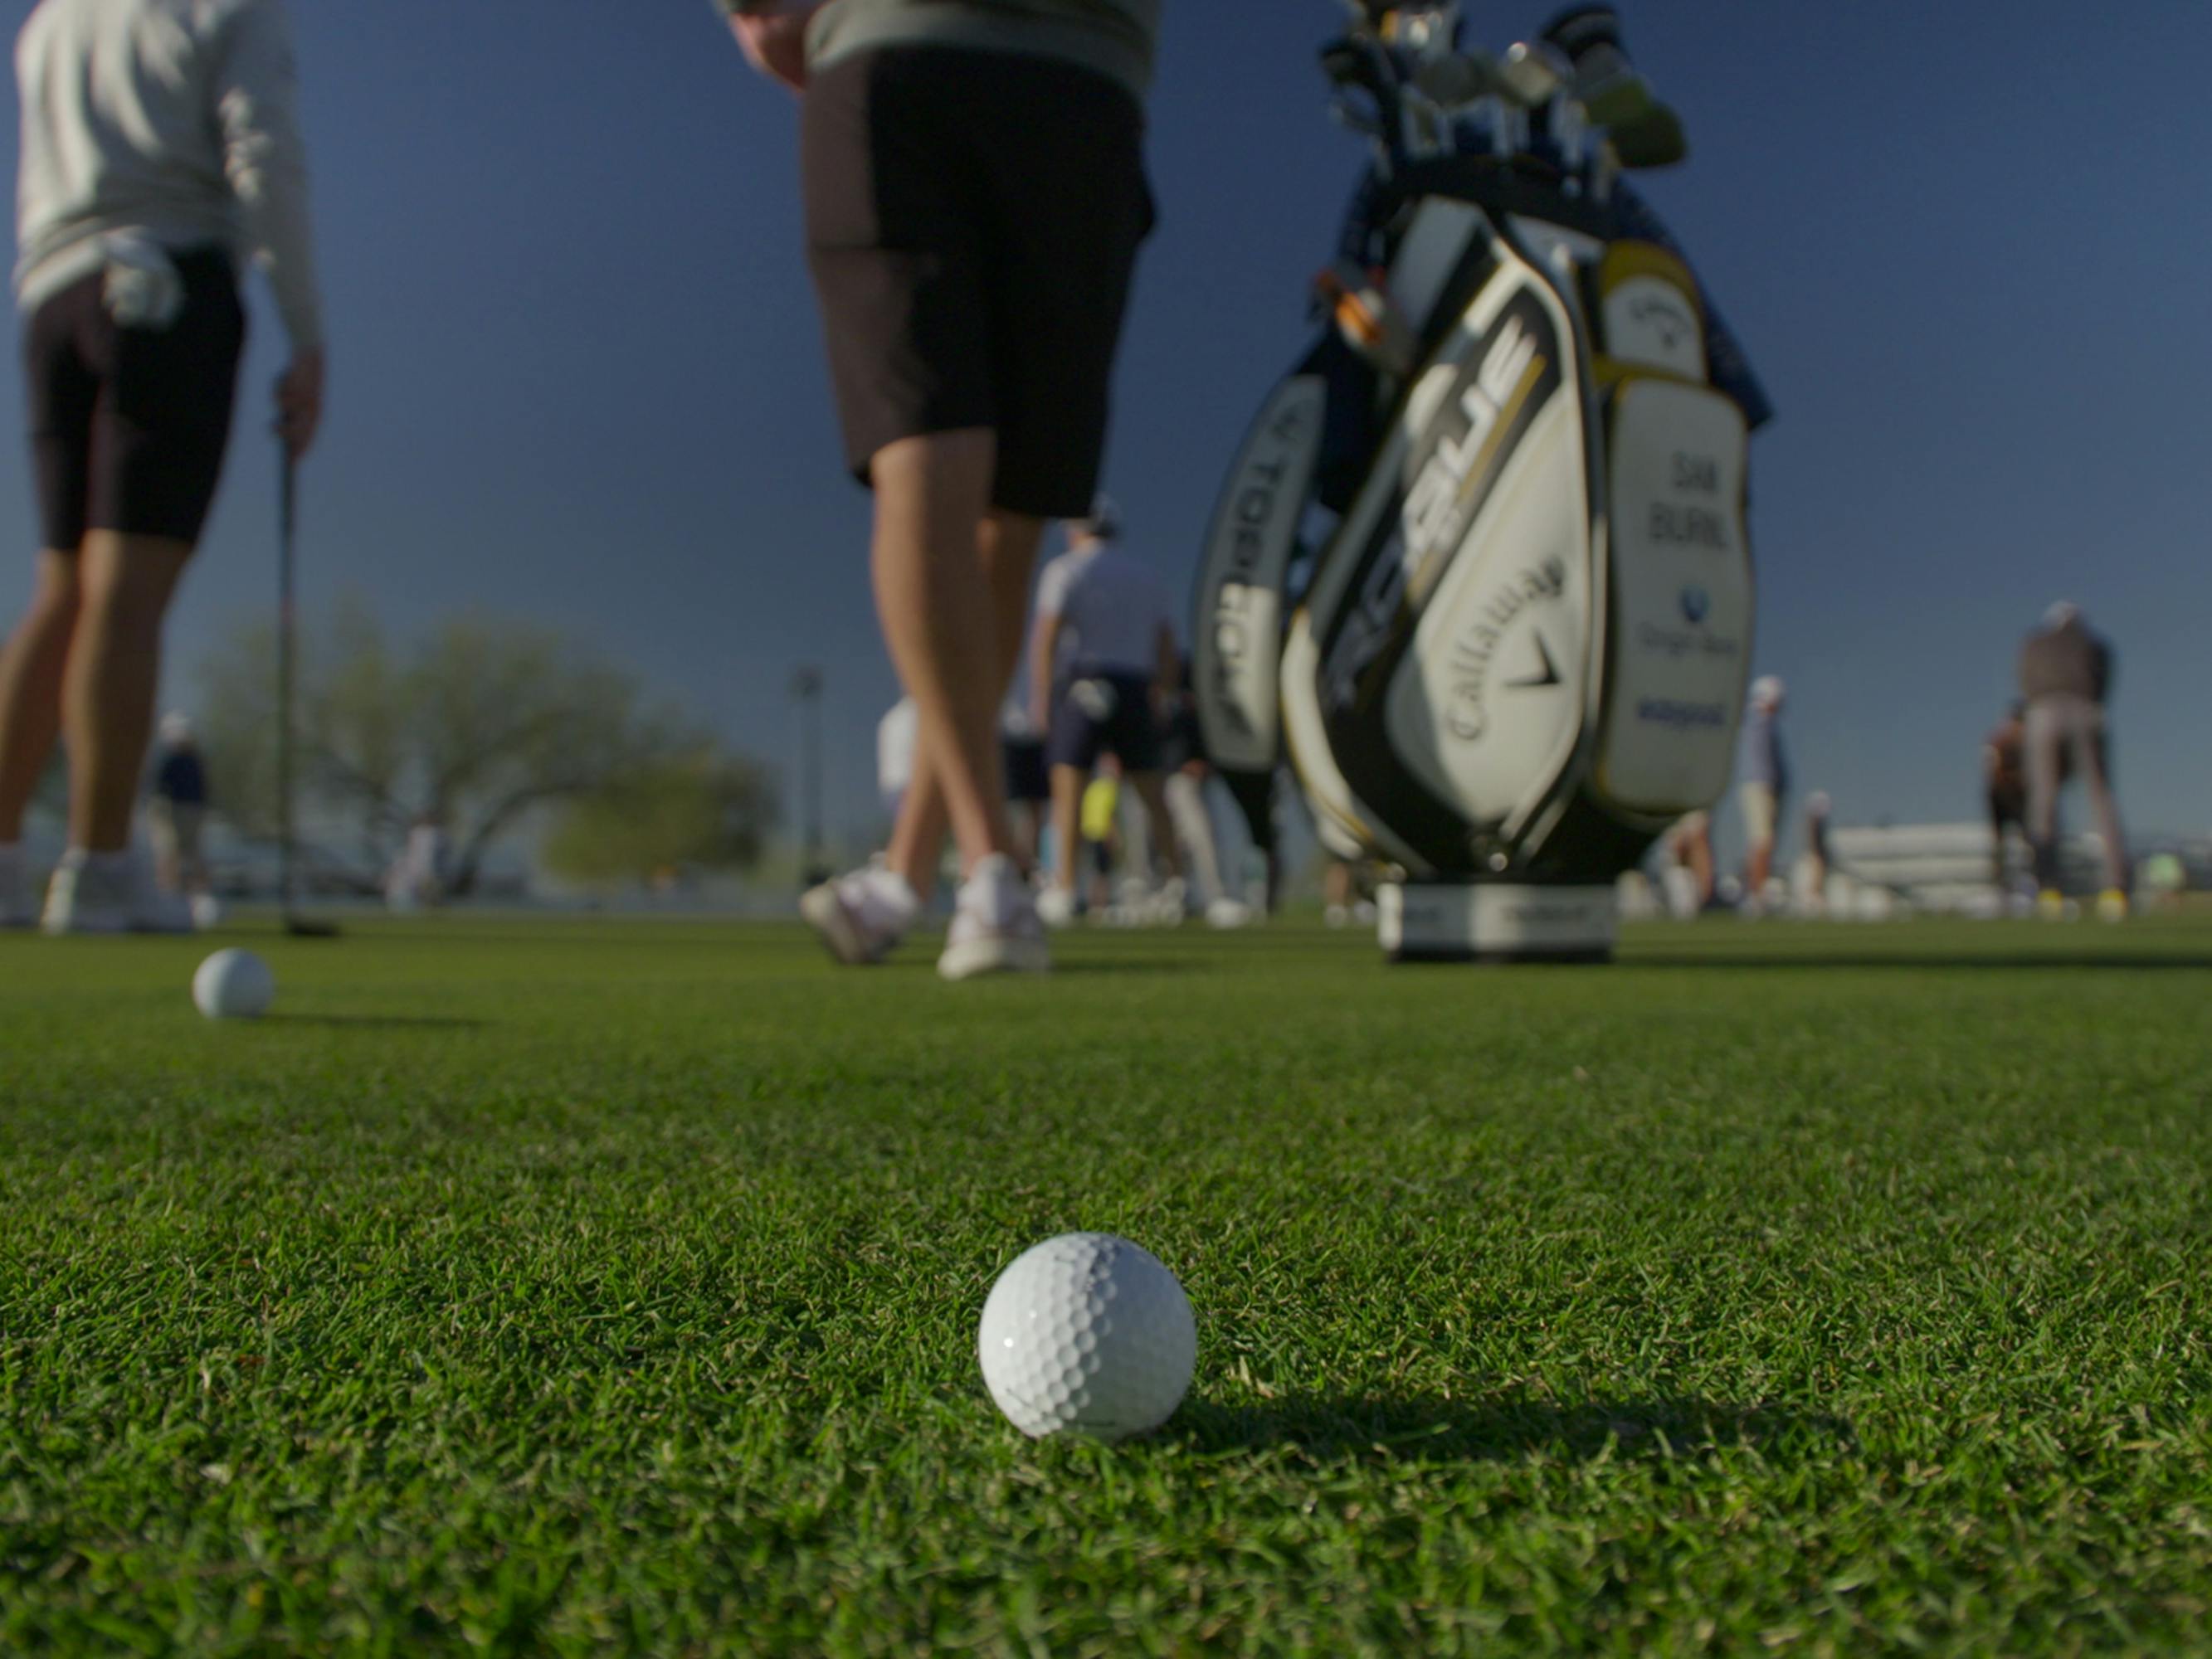 A golfball sits on the green. Behind the ball are some golfer's legs and a golf bag.